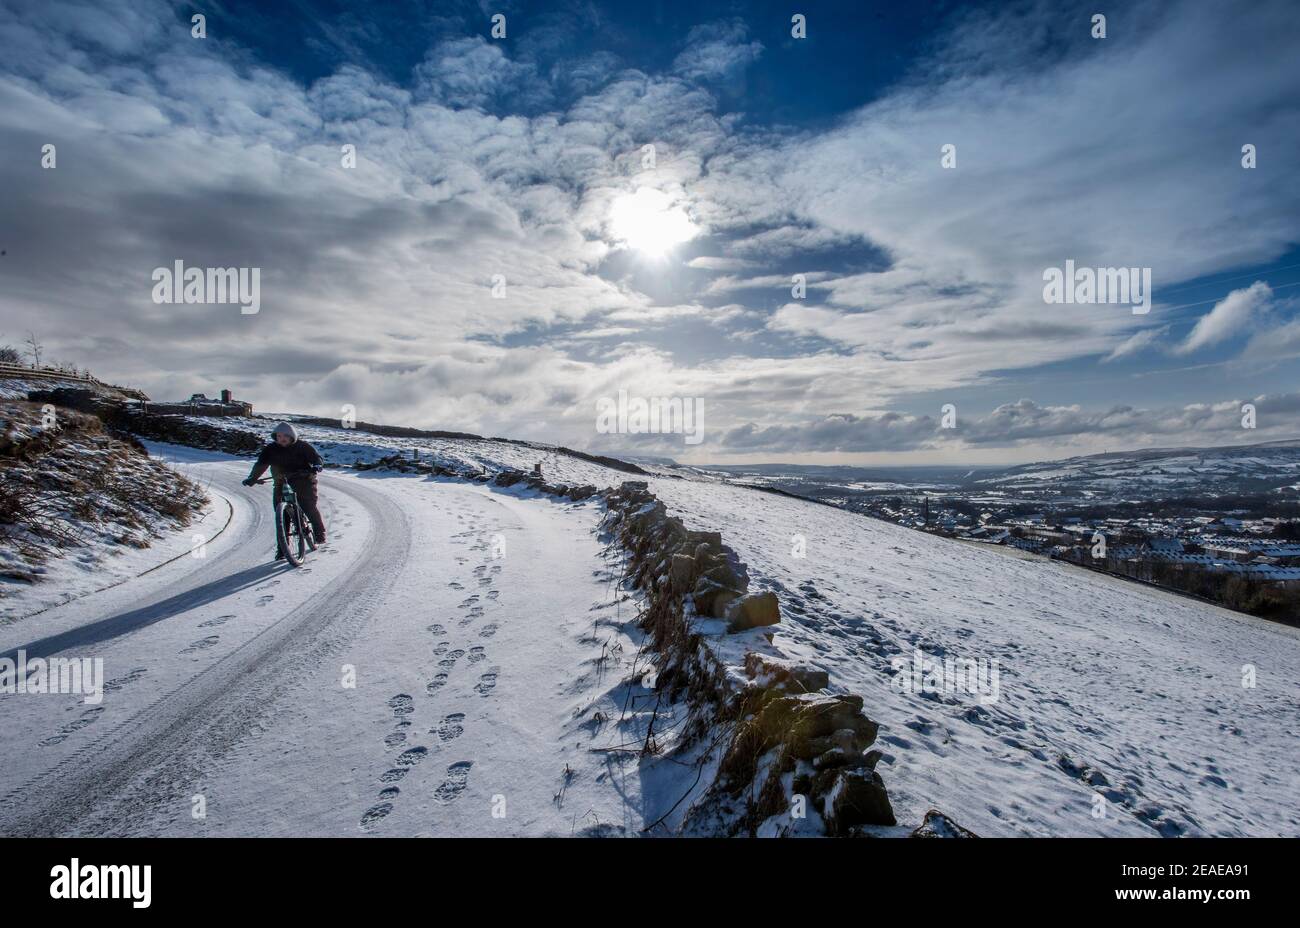 Haslingden, East Lancashire, England, 9th February 2021. A fresh blanket of snow covers the town of Haslingden as the freezing weather continues in the North West of England this week. A cyclist rides down the snow covered roads above the town. Credit: Paul Heyes/ Alamy Live News Stock Photo